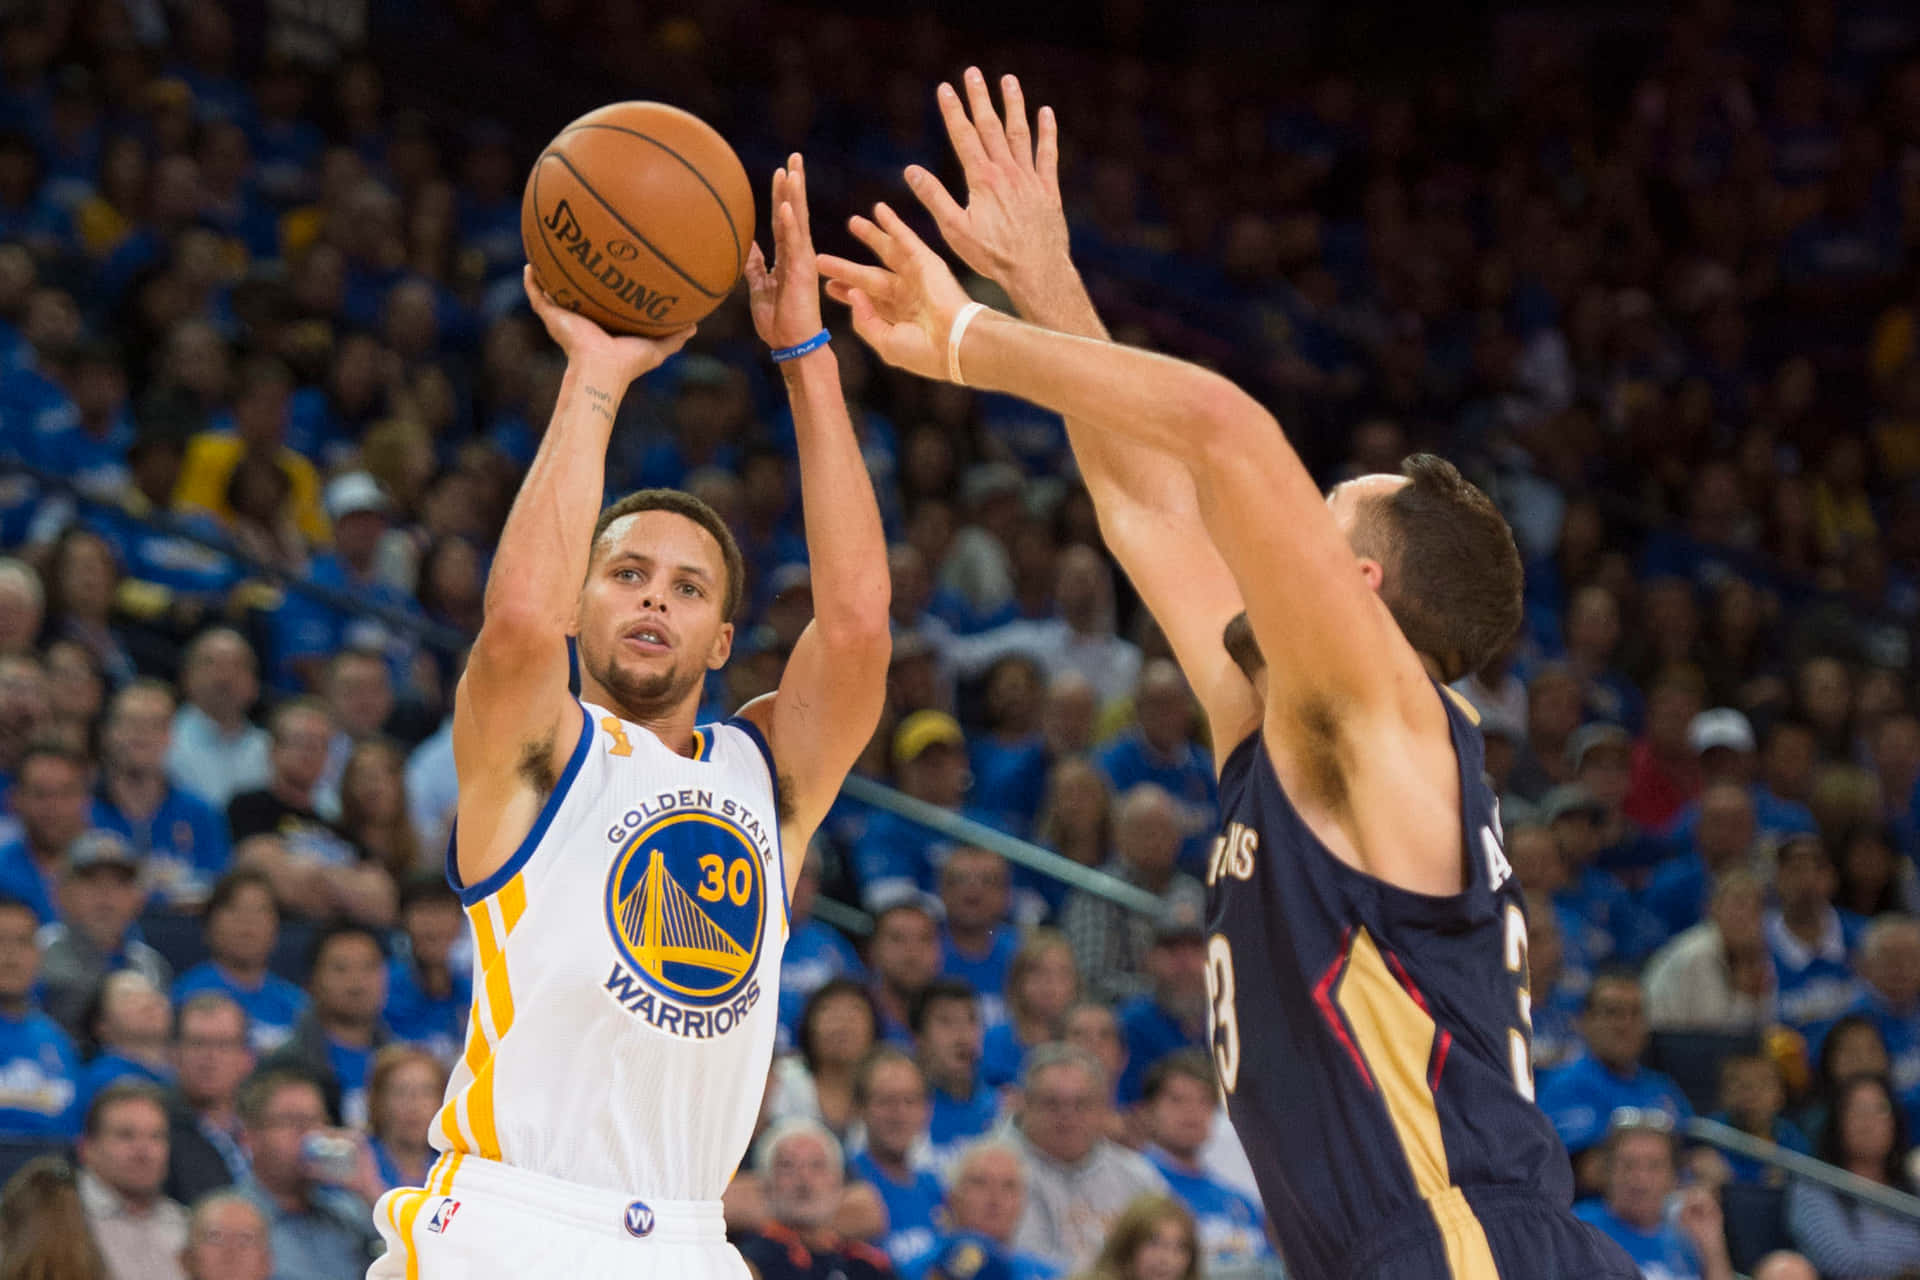 Stephen Curry making a jump shot during a basketball game